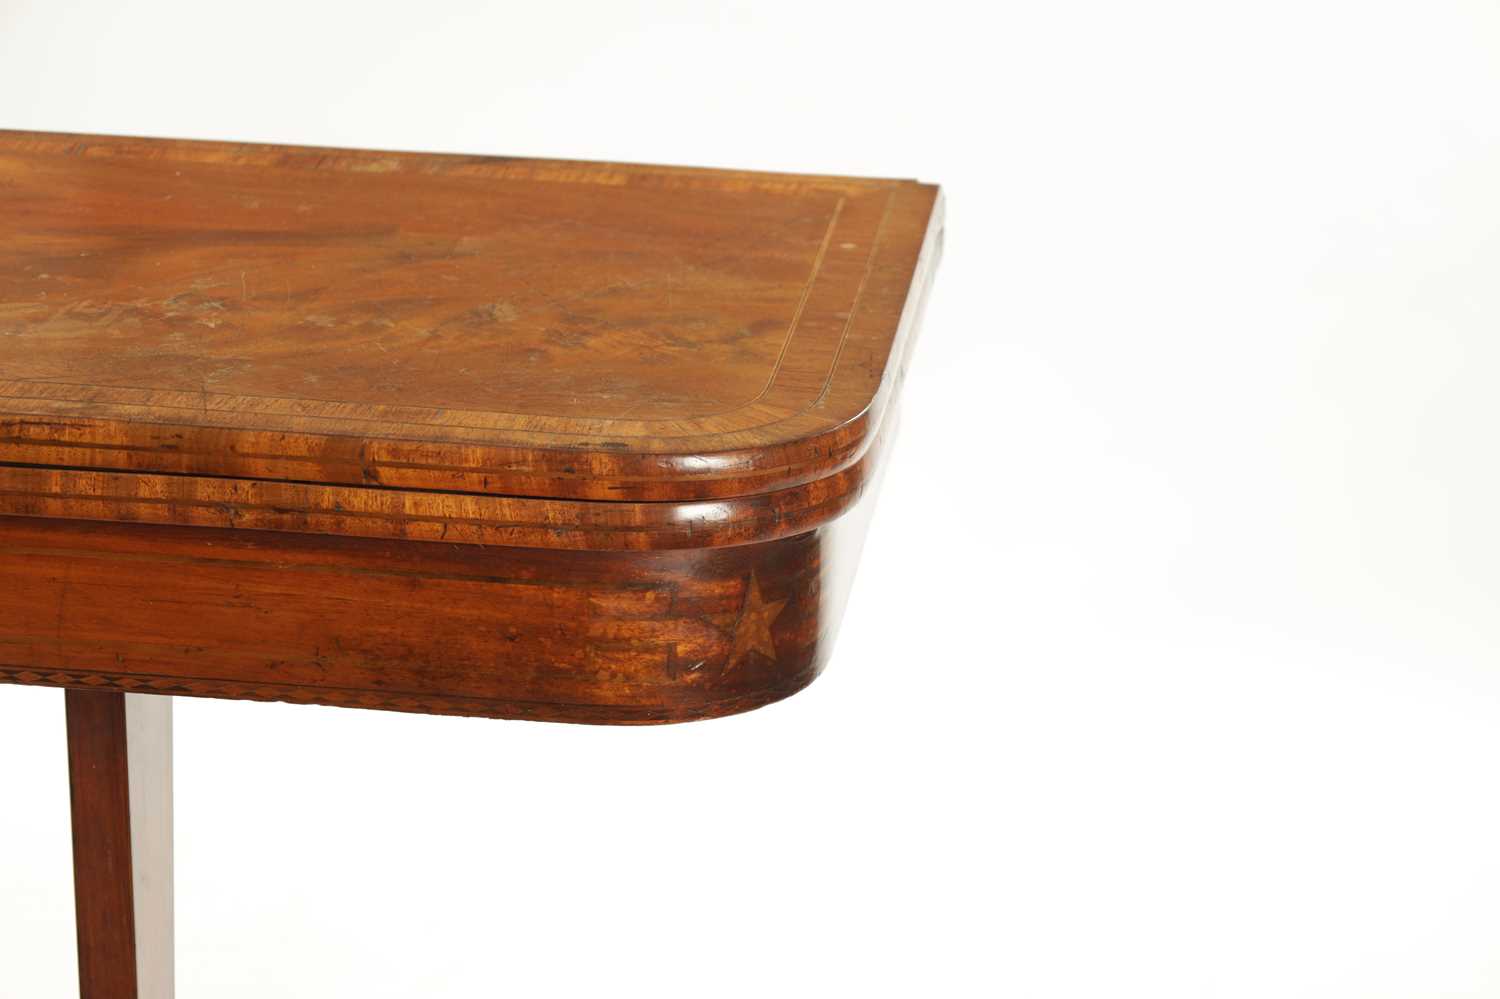 A REGENCY FIGURED MAHOGANY AND INLAID CARD TABLE - Image 3 of 10